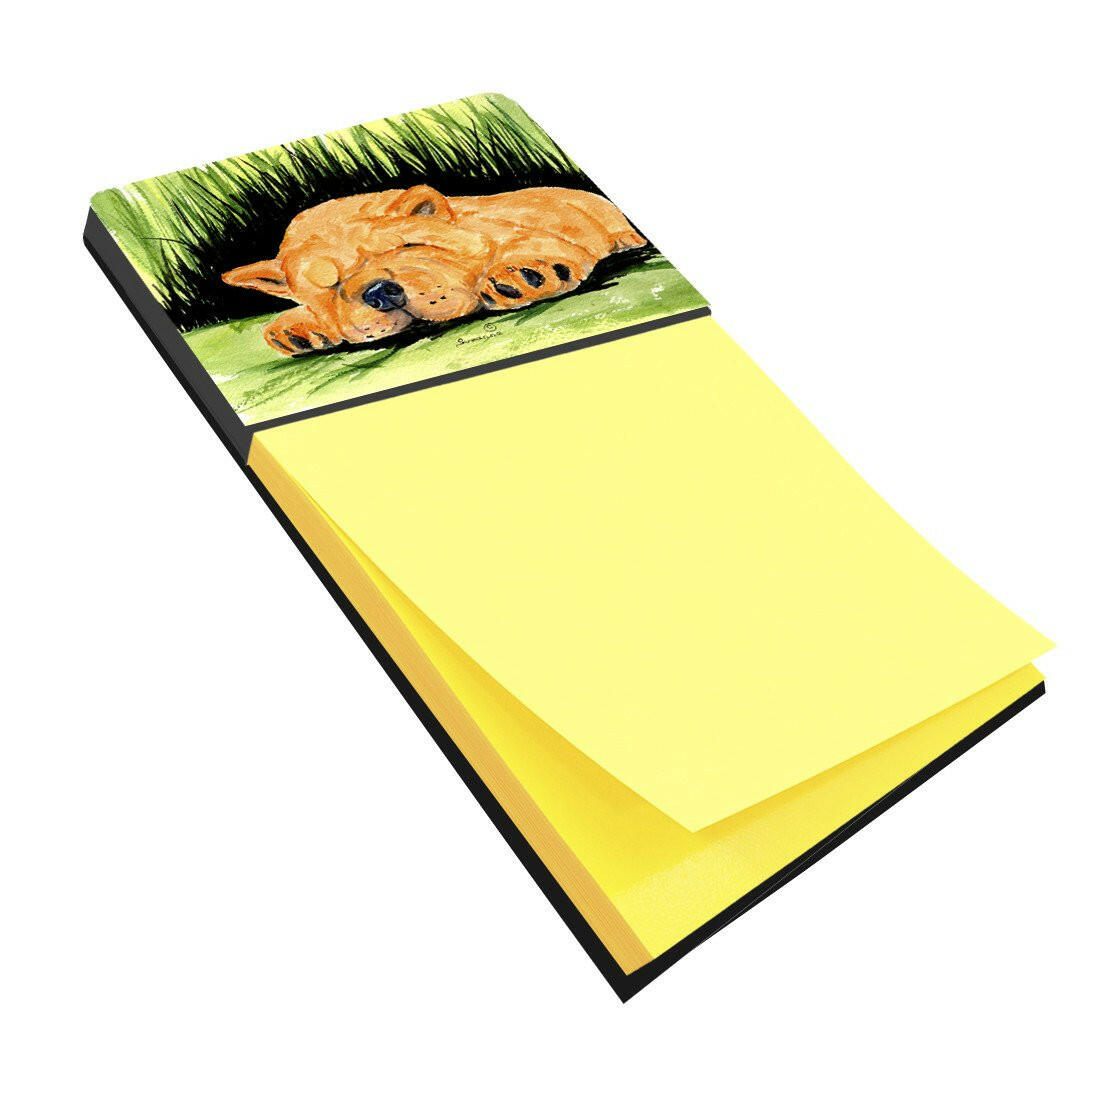 Chow Chow Refiillable Sticky Note Holder or Postit Note Dispenser SS8526SN by Caroline's Treasures